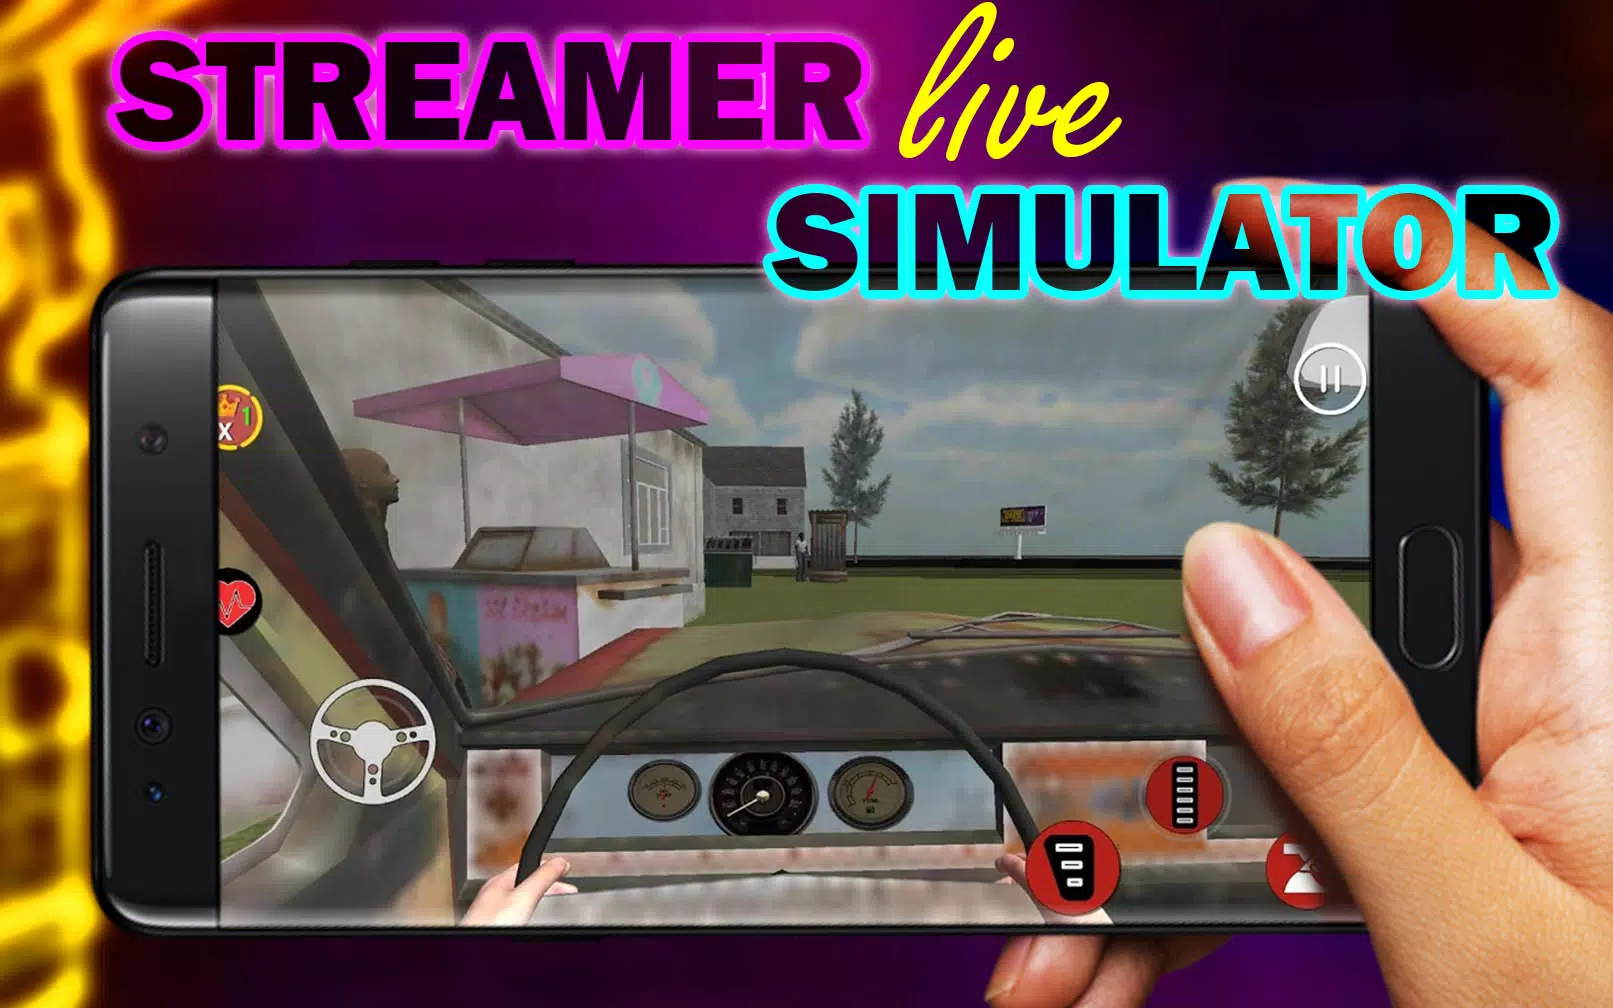 App Streamer Life Simulator Tips Android game 2020 